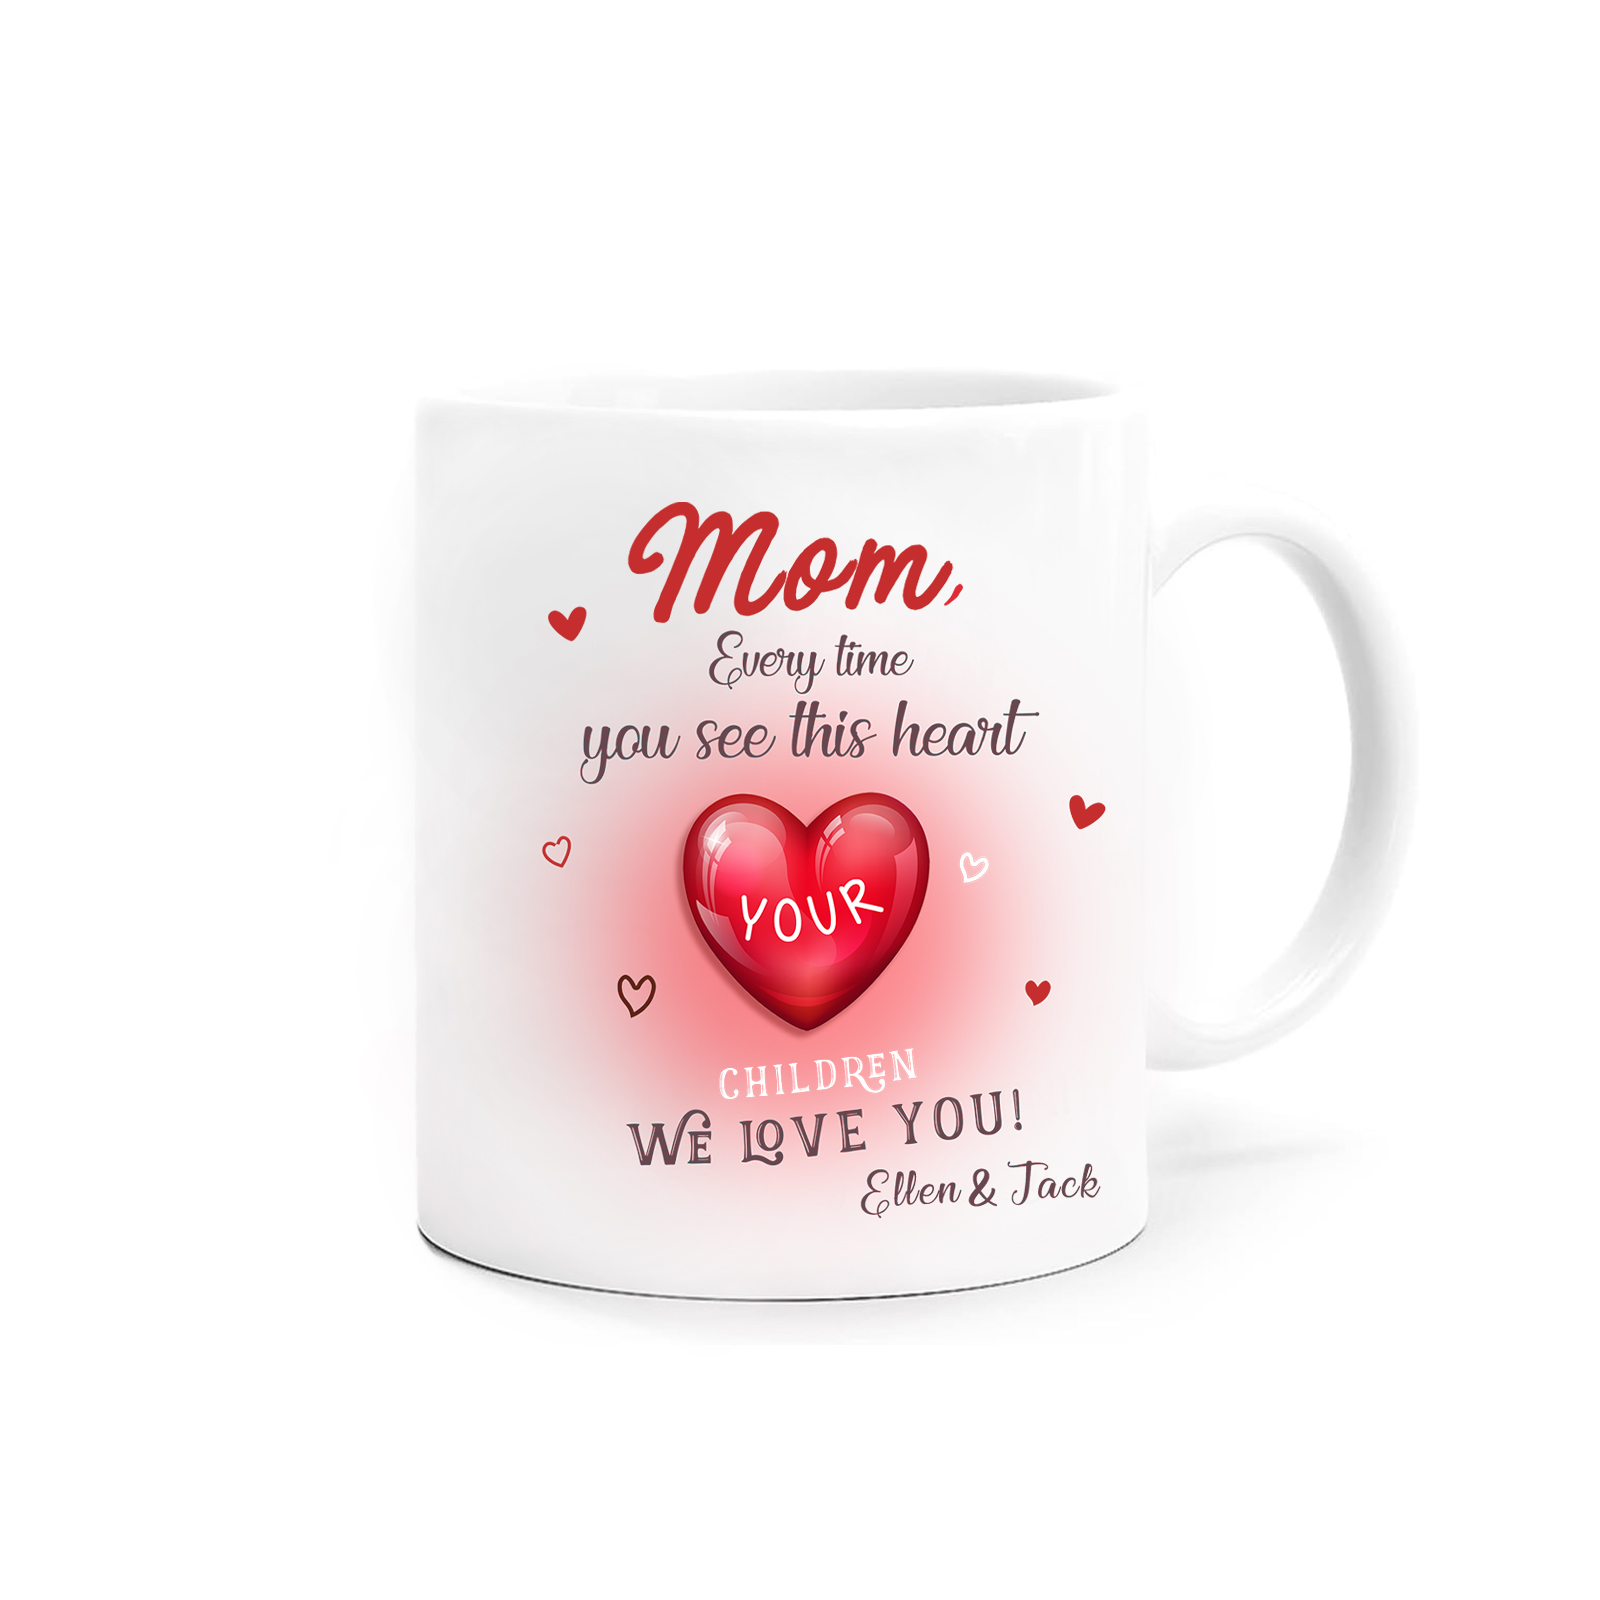 Personalized Custom Text Ceramic Cup with Exquisite Copywriting and Love Style for Mom